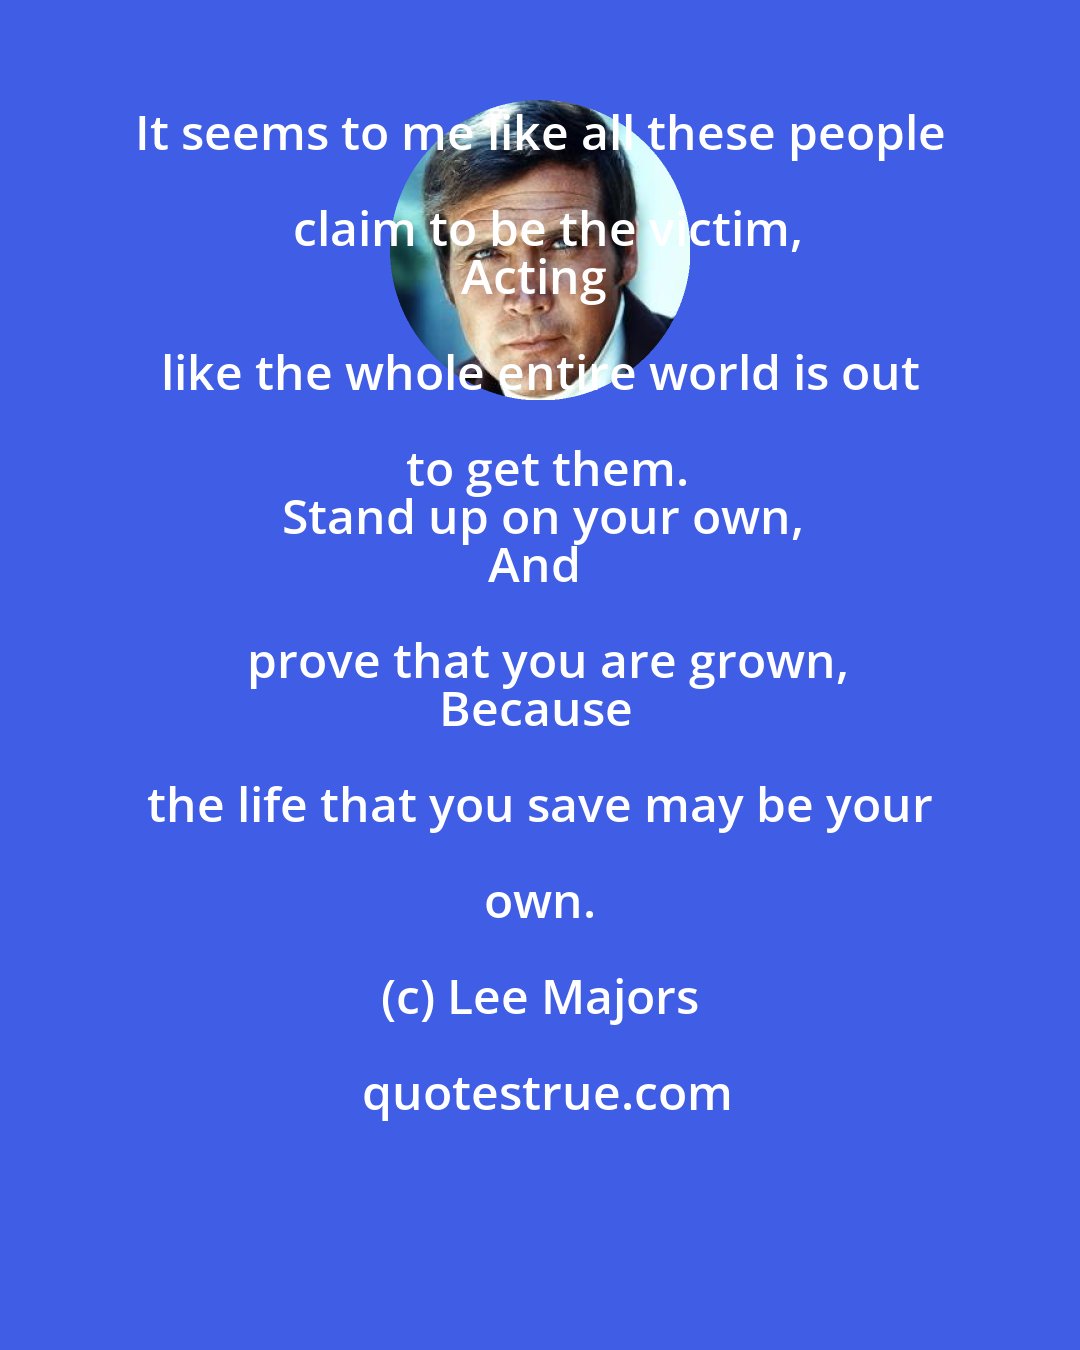 Lee Majors: It seems to me like all these people claim to be the victim,
Acting like the whole entire world is out to get them.
Stand up on your own,
And prove that you are grown,
Because the life that you save may be your own.